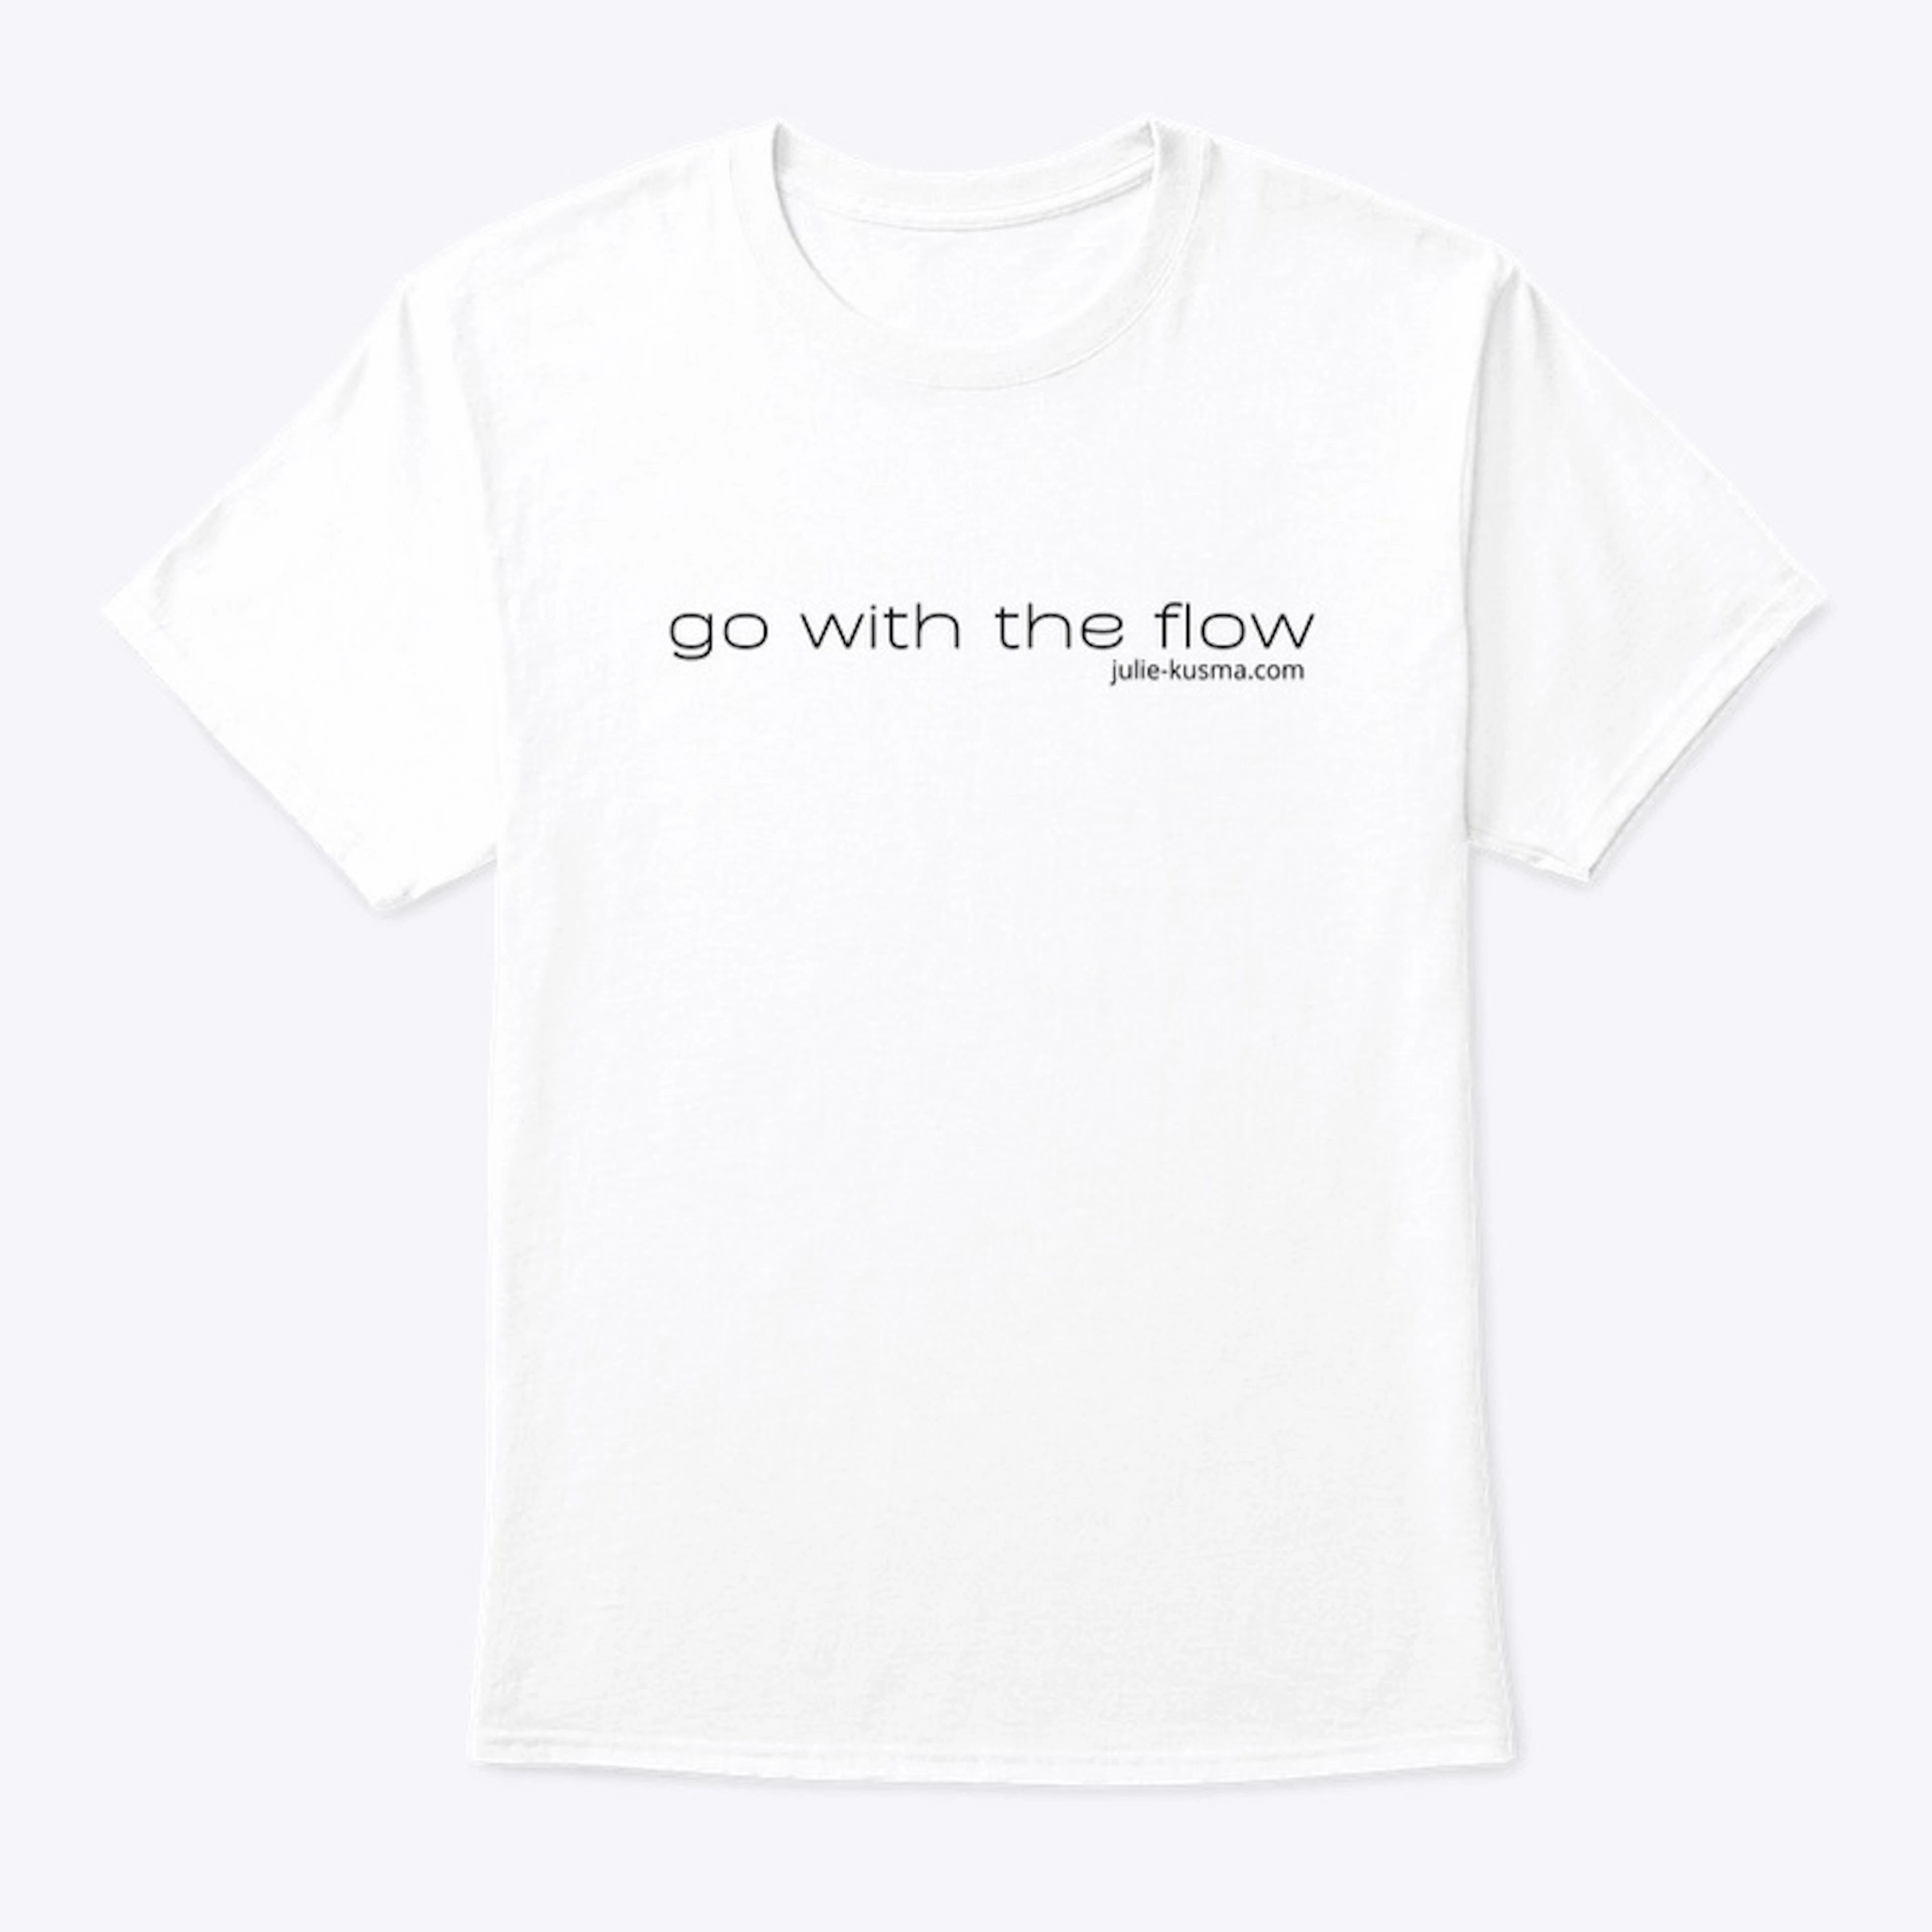 Line Please "Go With The Flow"